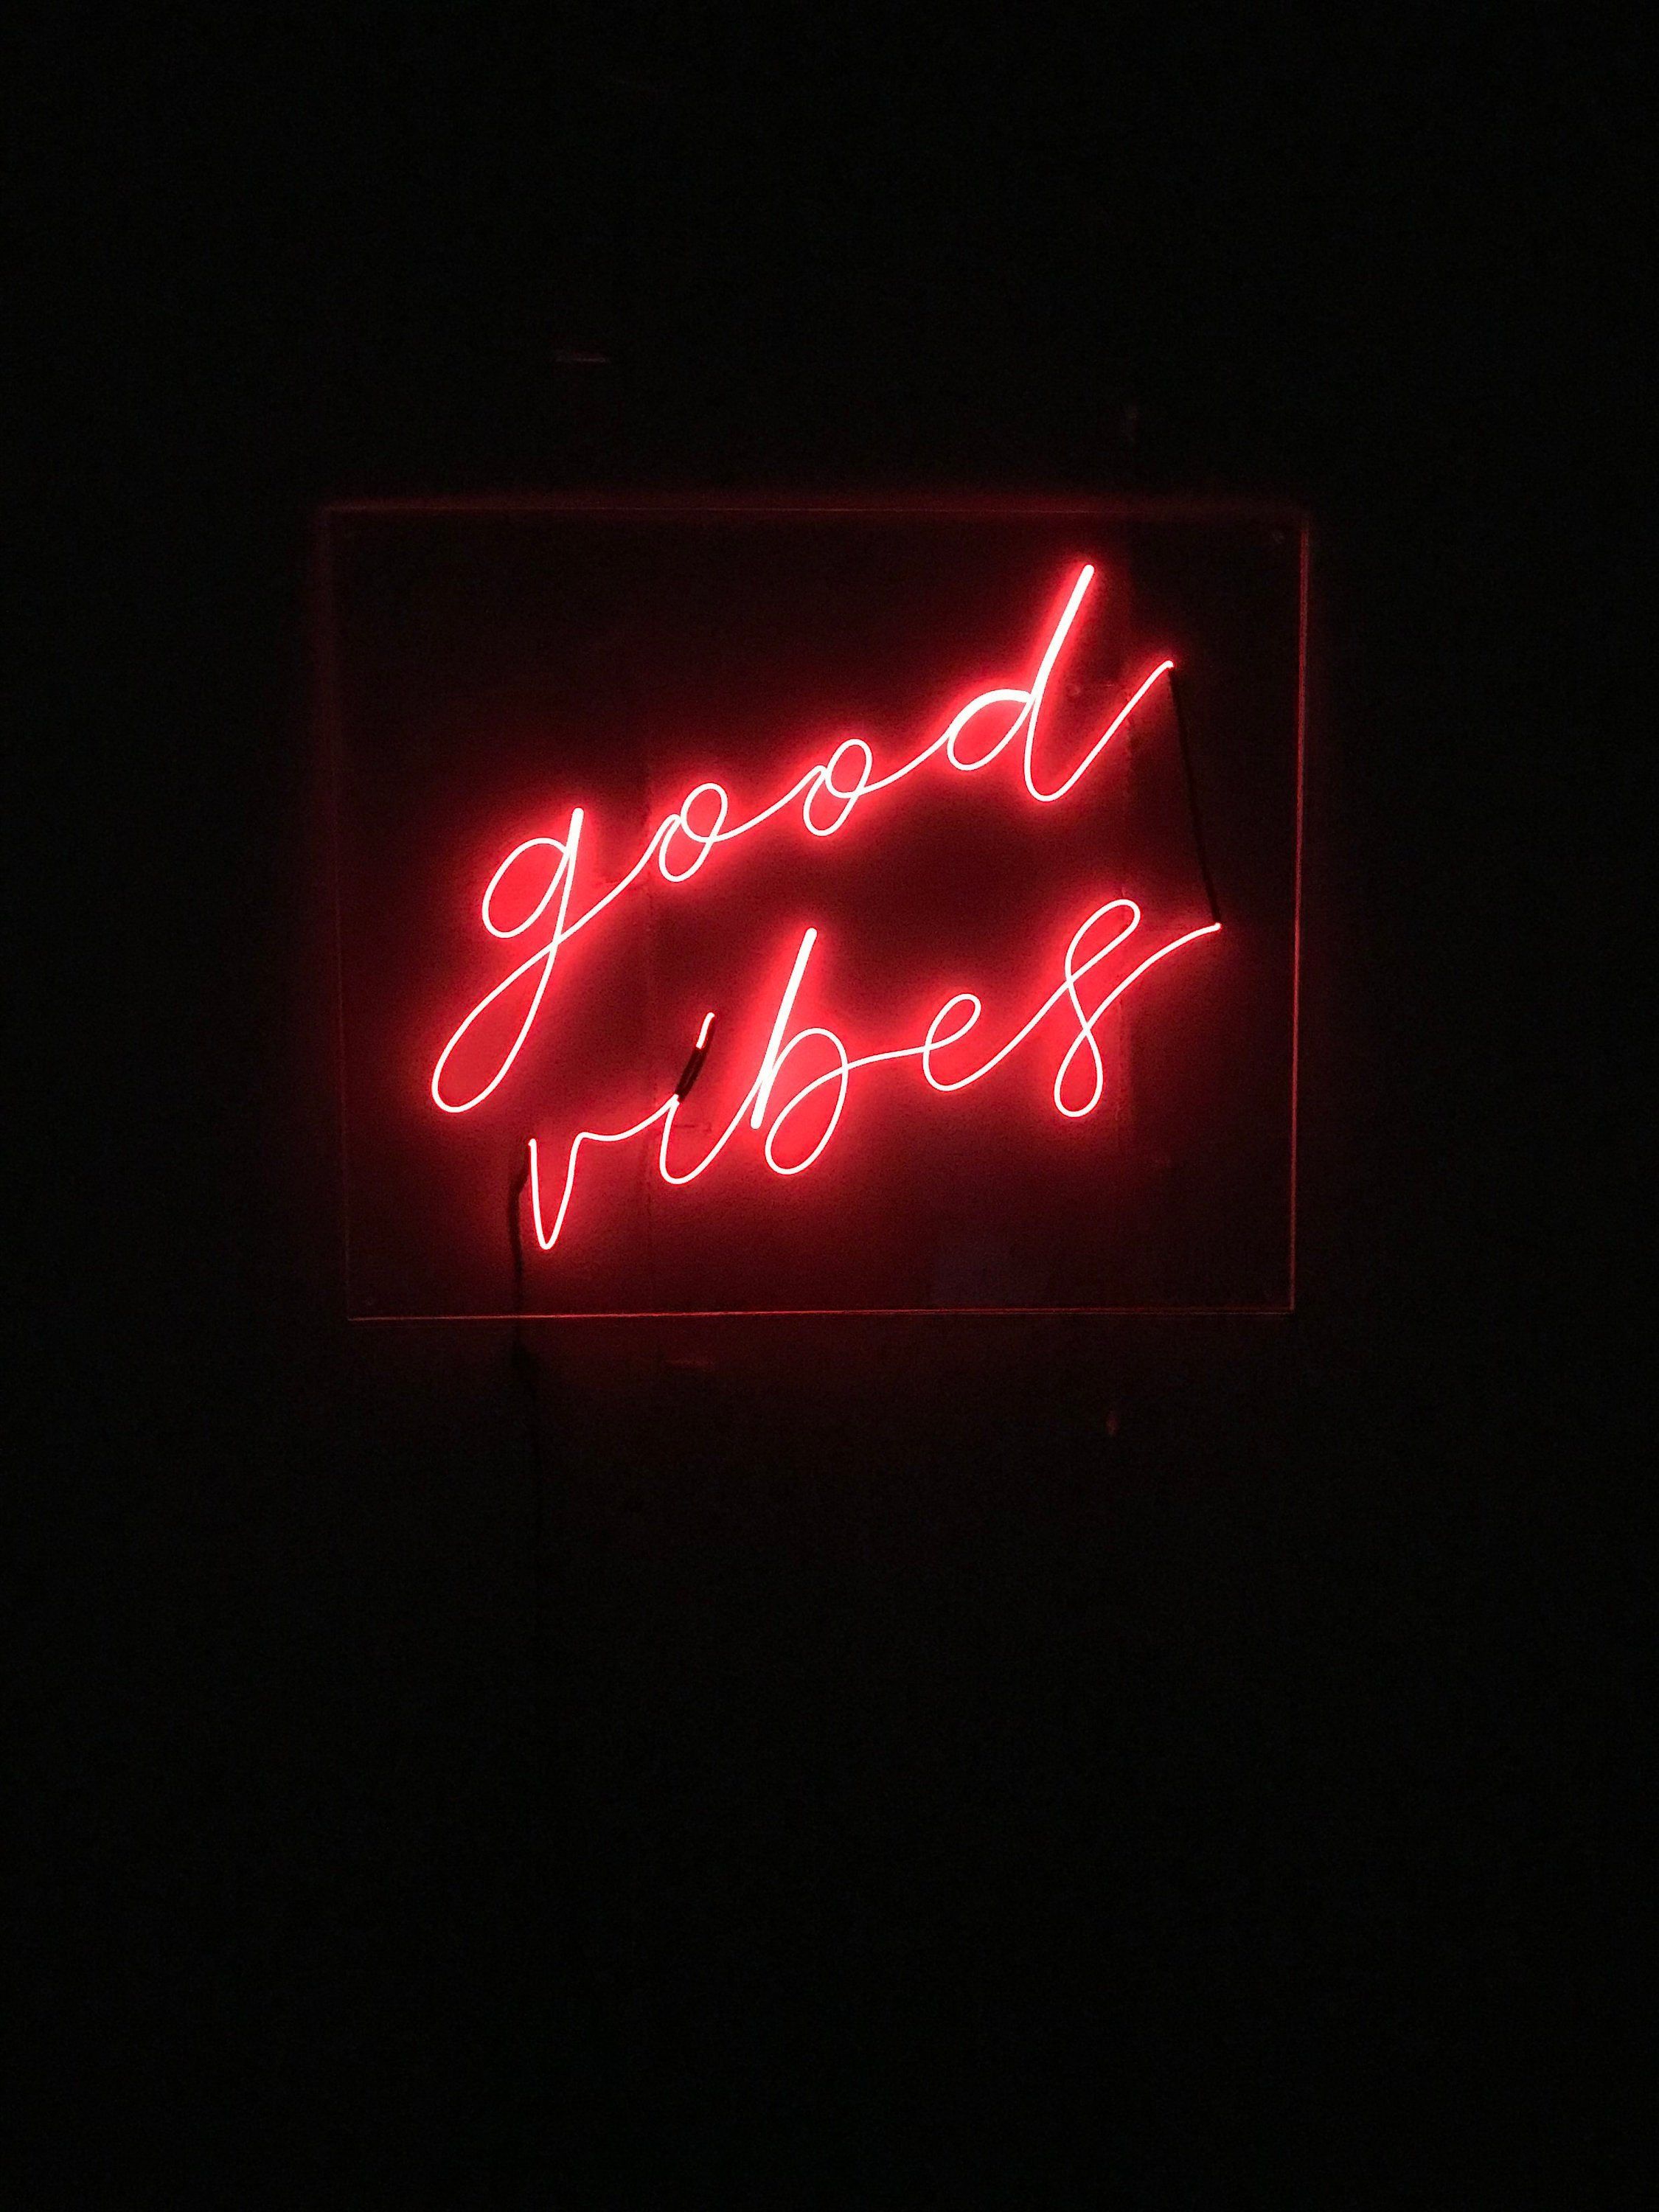 A neon sign that says good vibes - Red, light red, neon red